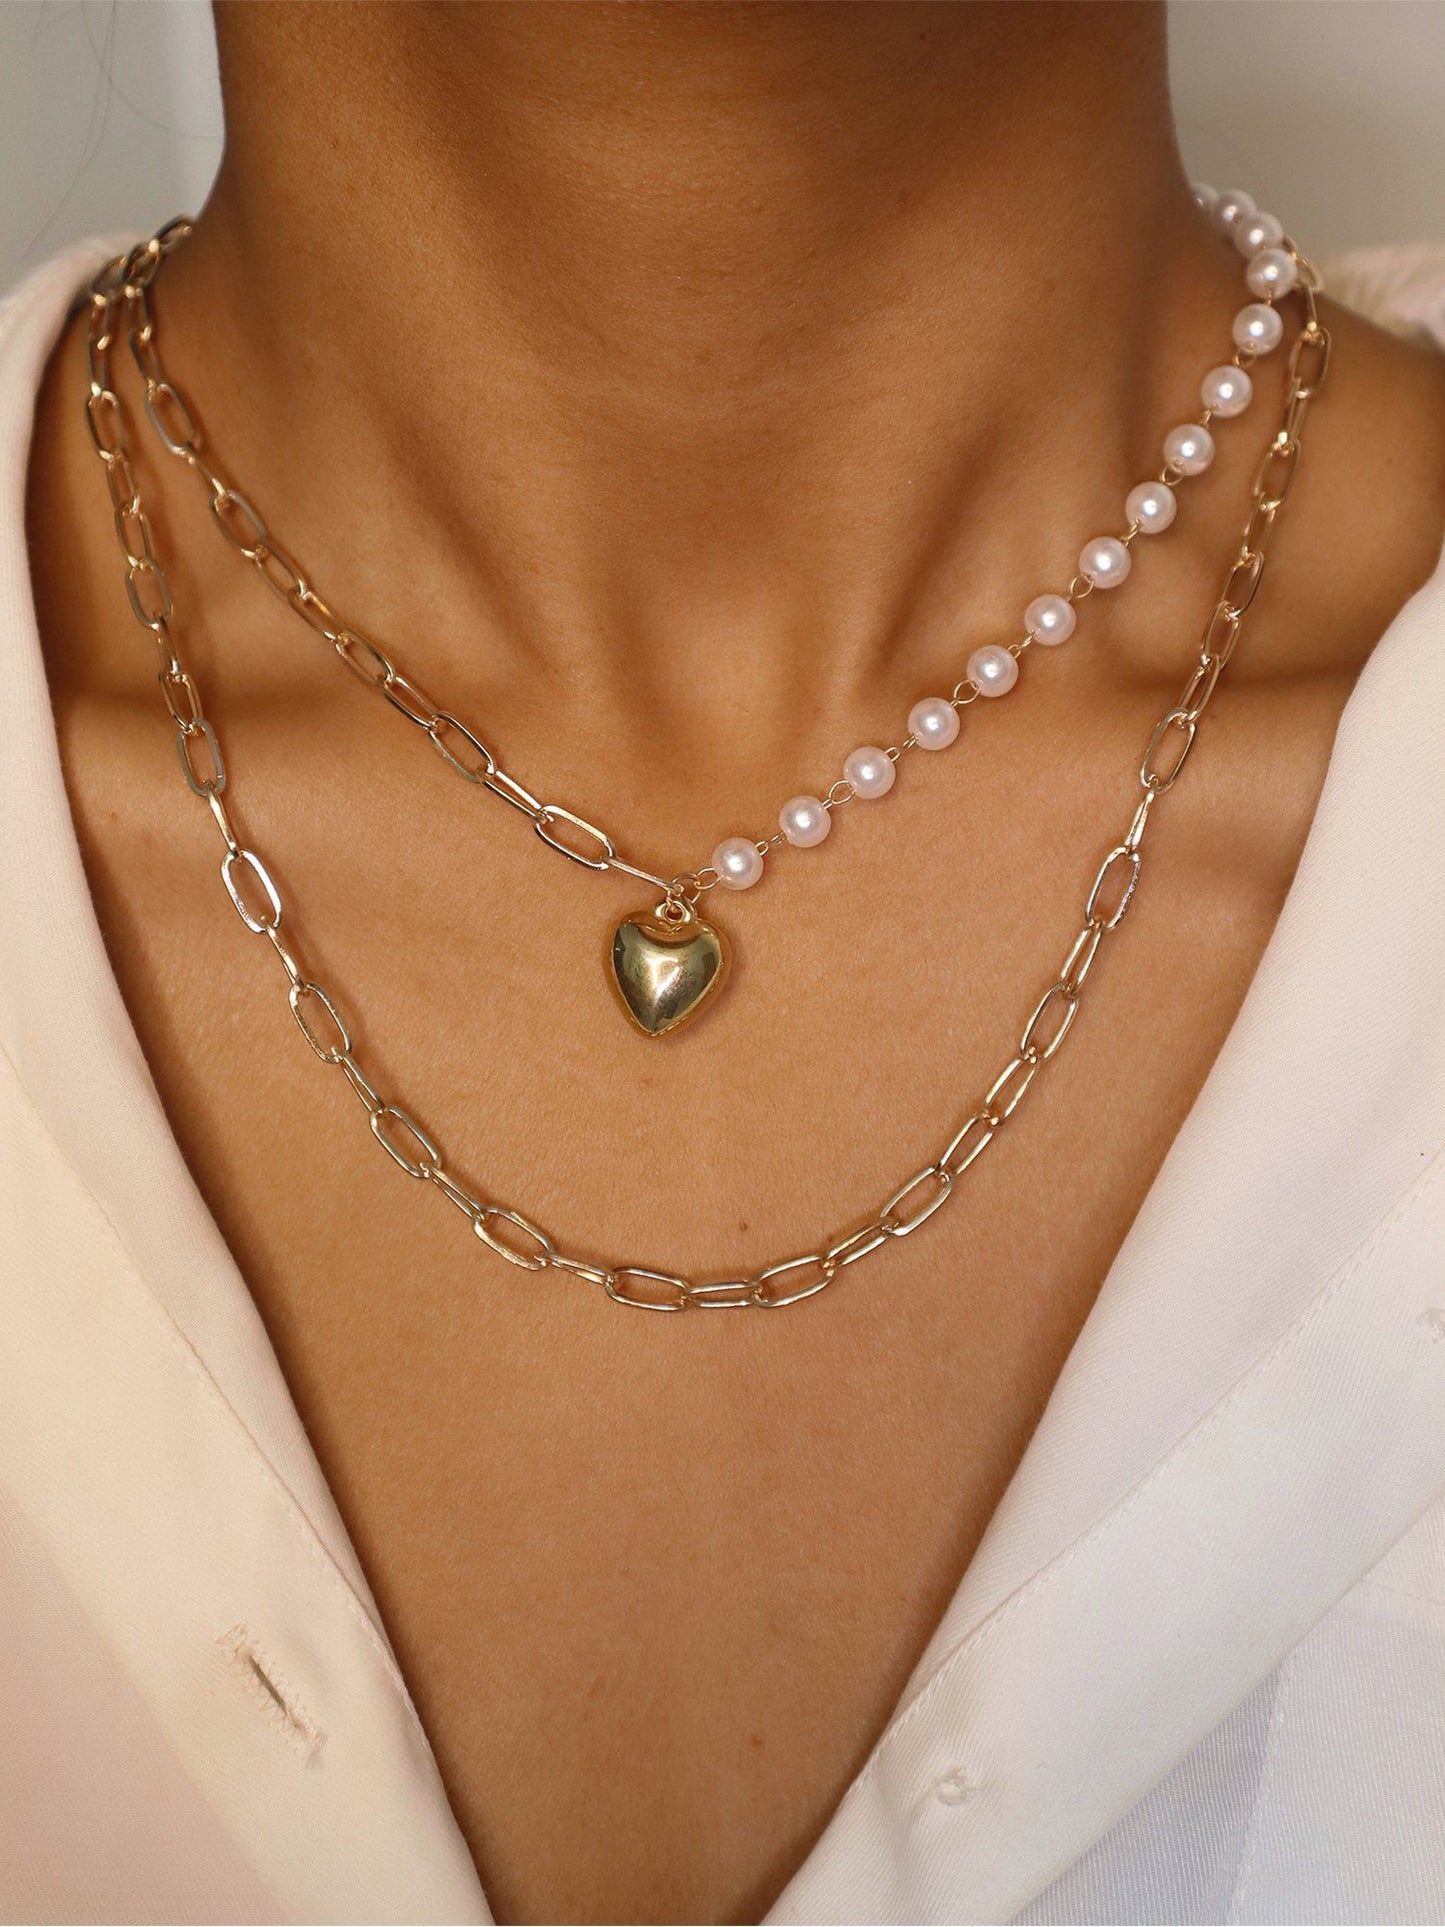 Gold and Pearl Half n Half Layered Necklace with Heart Pendant